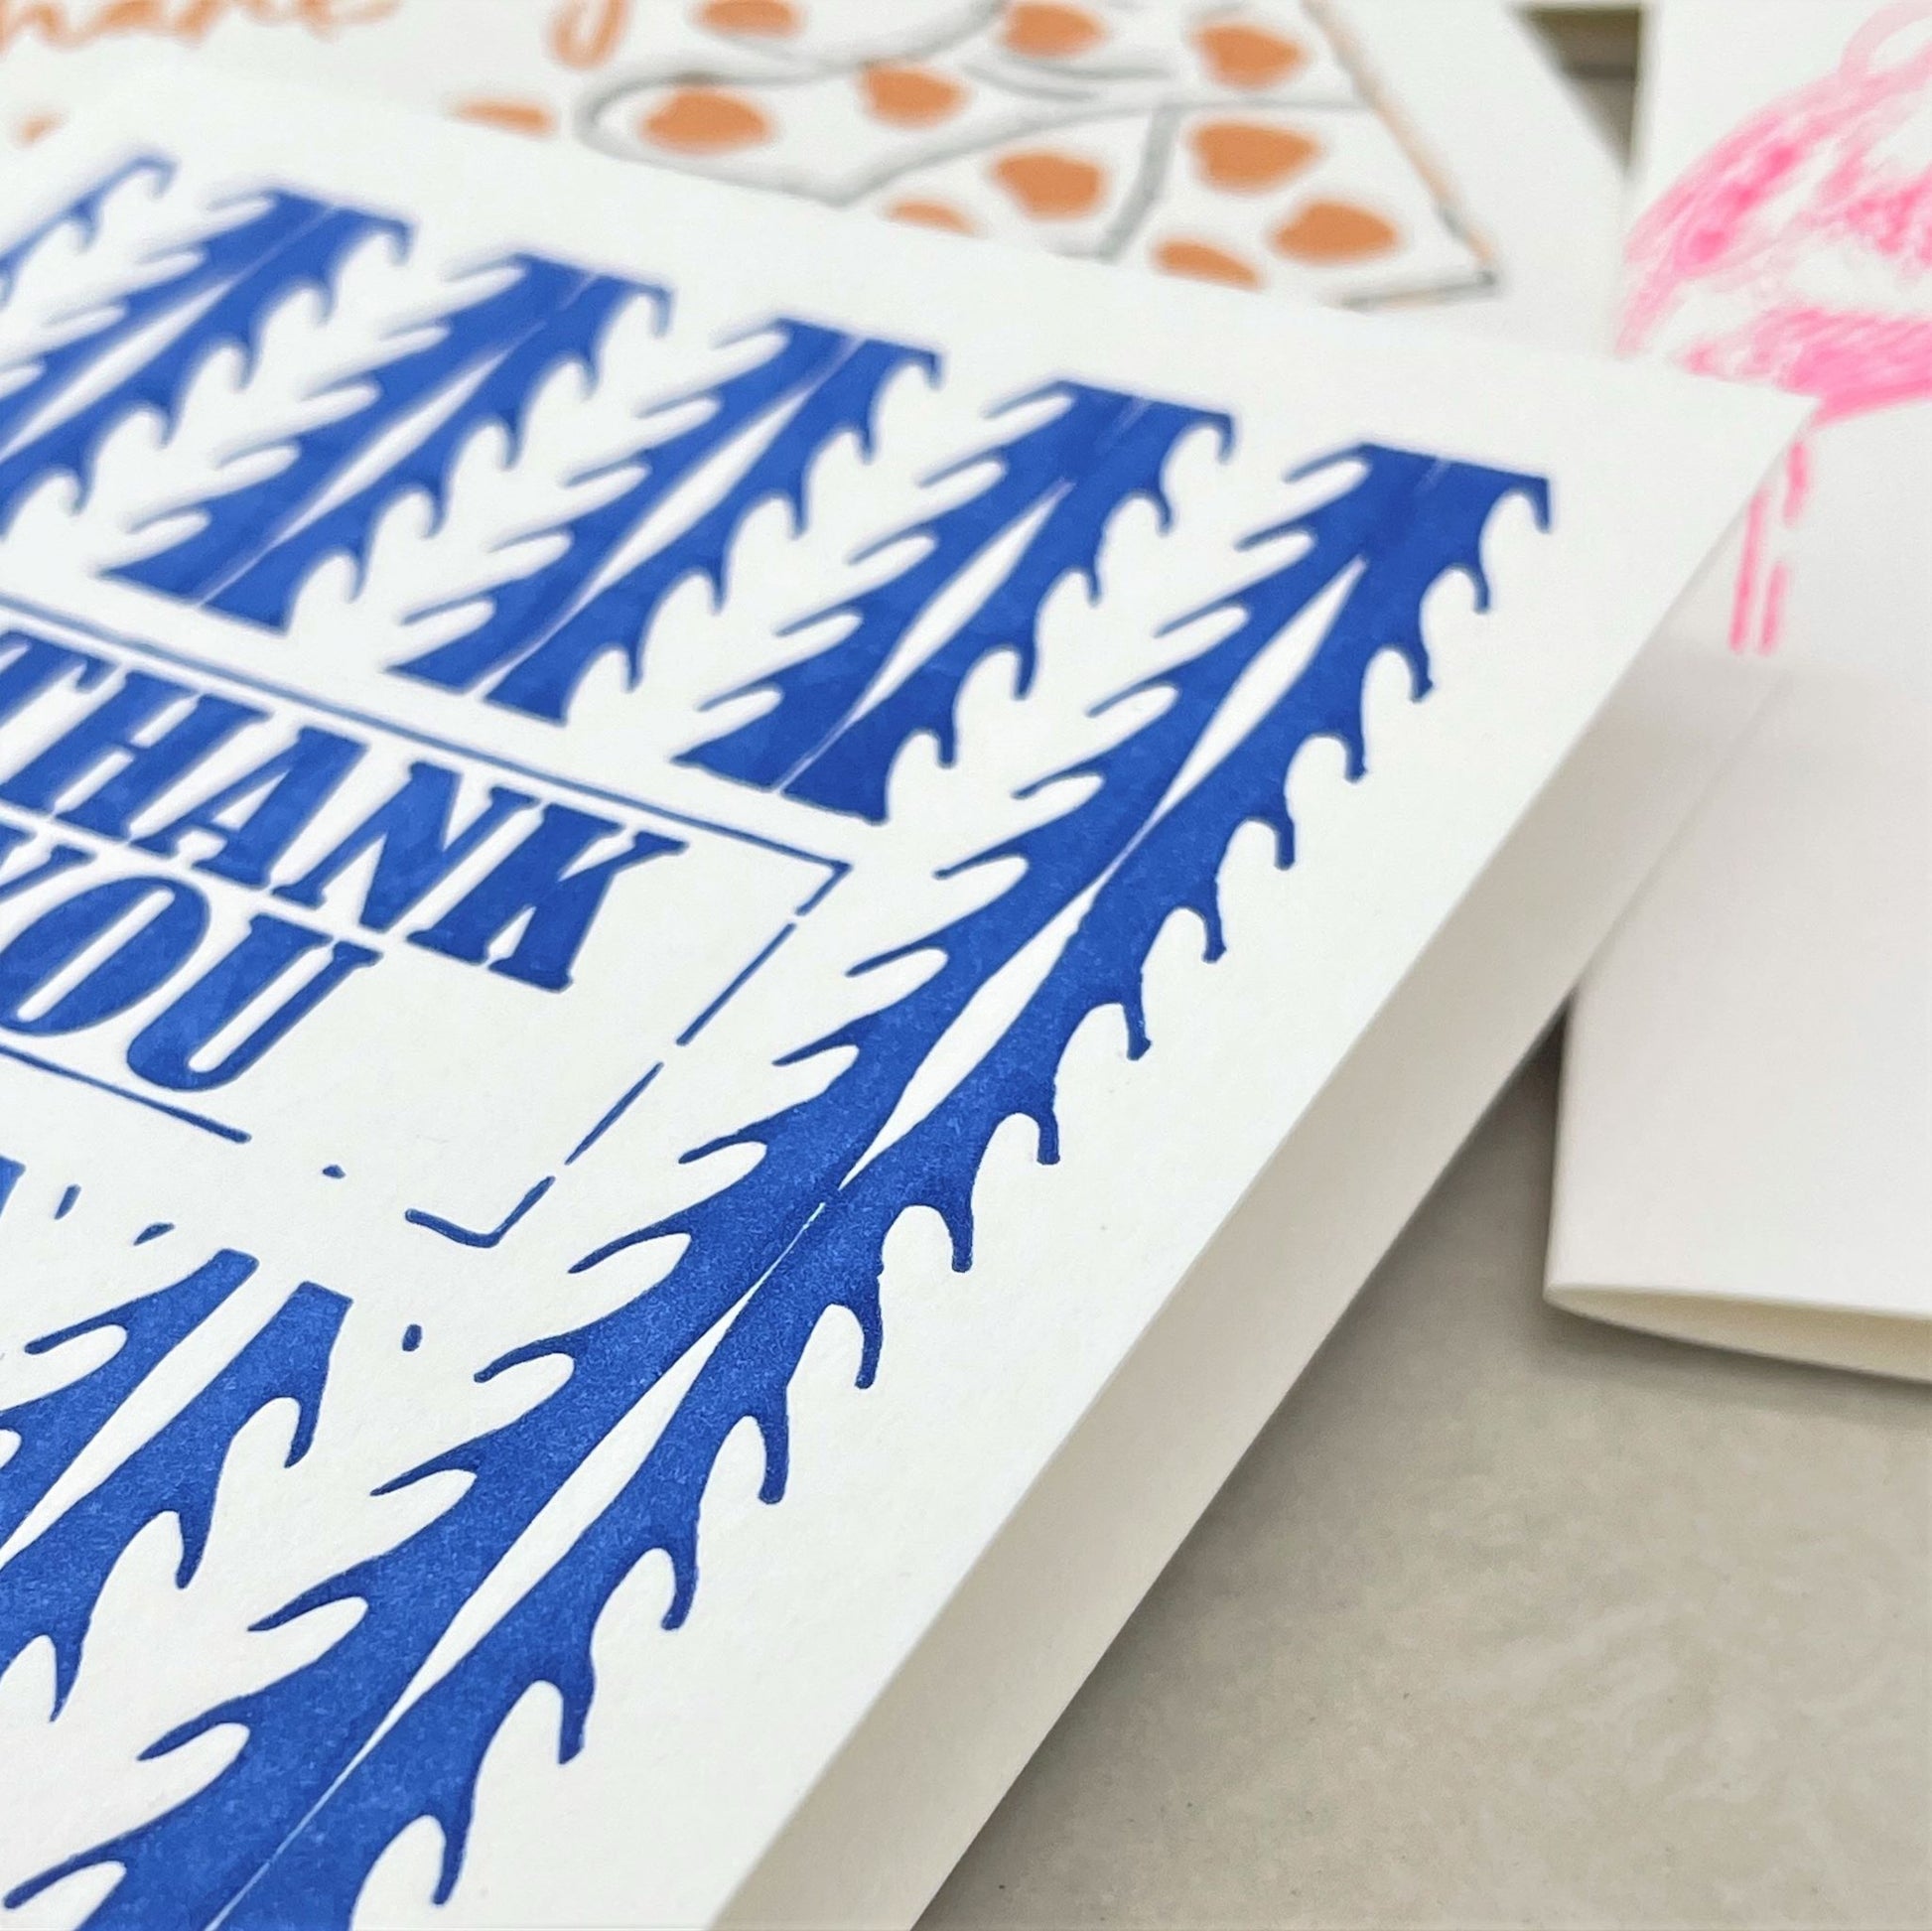 small greetings card with thank you message in blue and geometric pattern, close up of the card